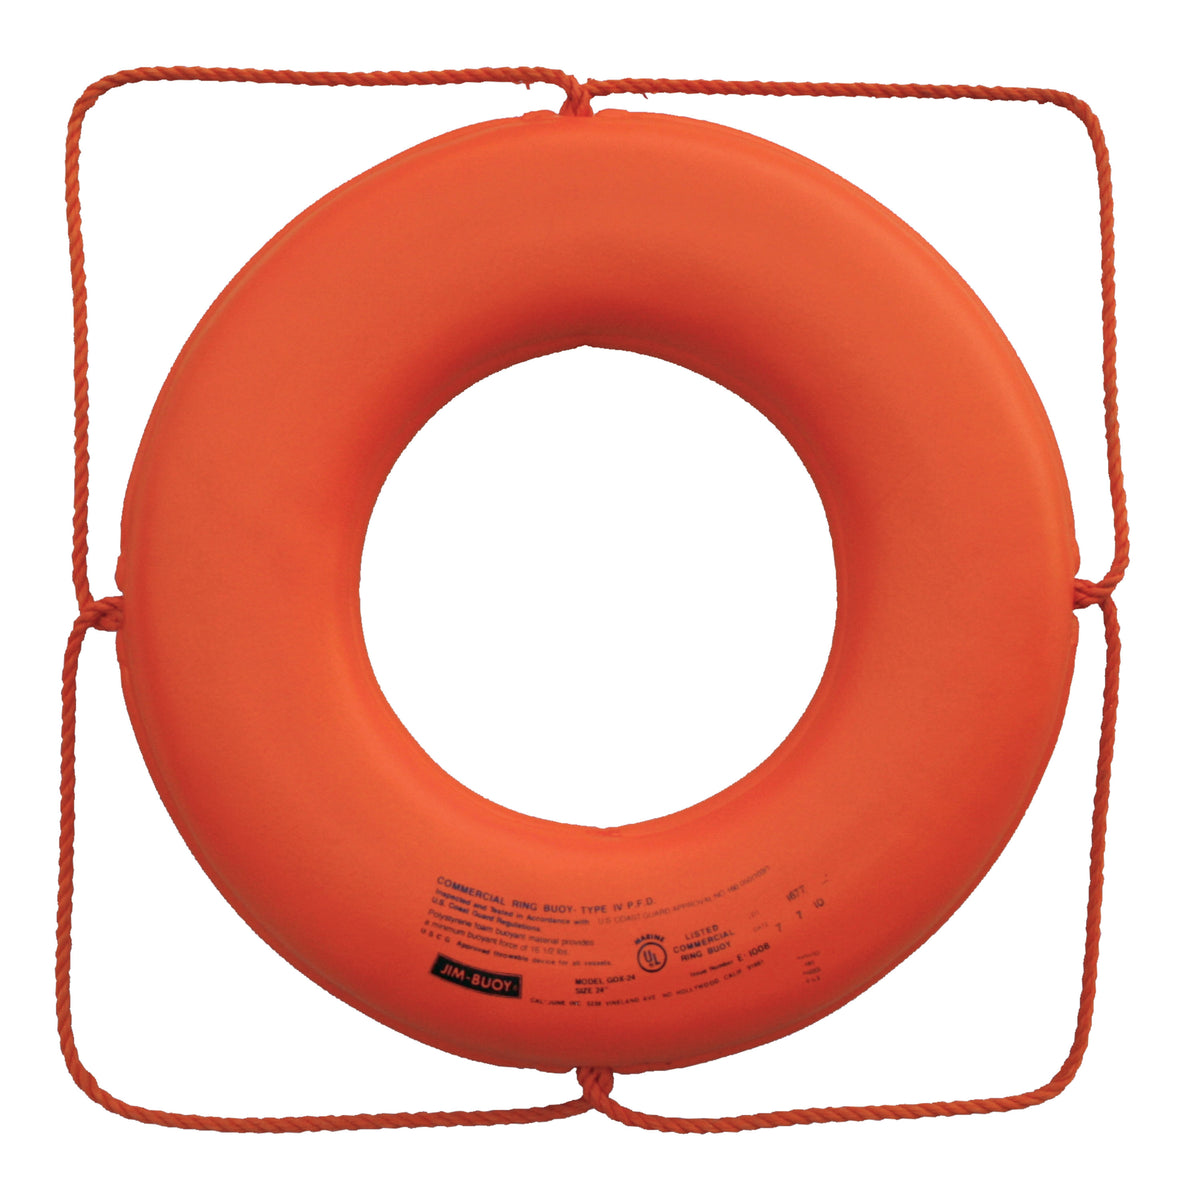 Jim-Buoy GO-X-24 GX-Series Life Ring with Rope Molded Into Core - 24", Orange